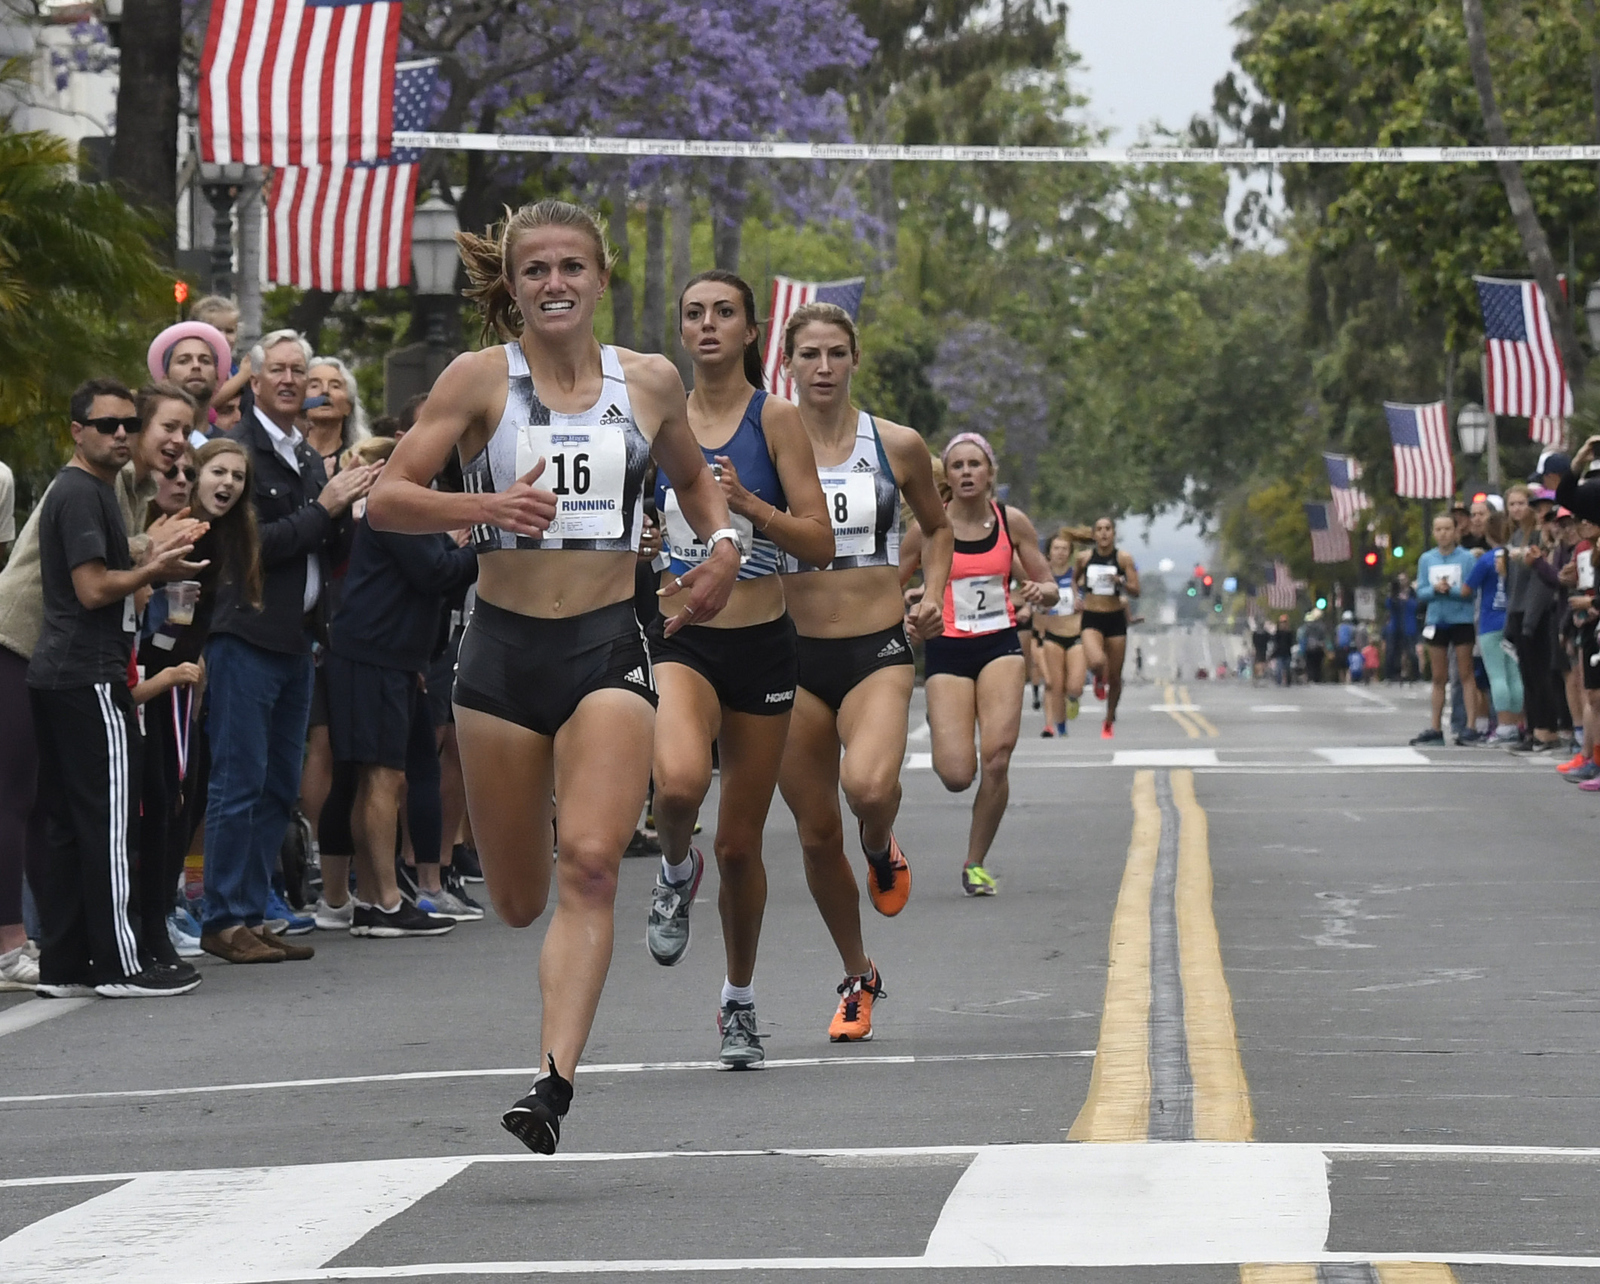 State Street Mile Record Breakers The Santa Barbara Independent